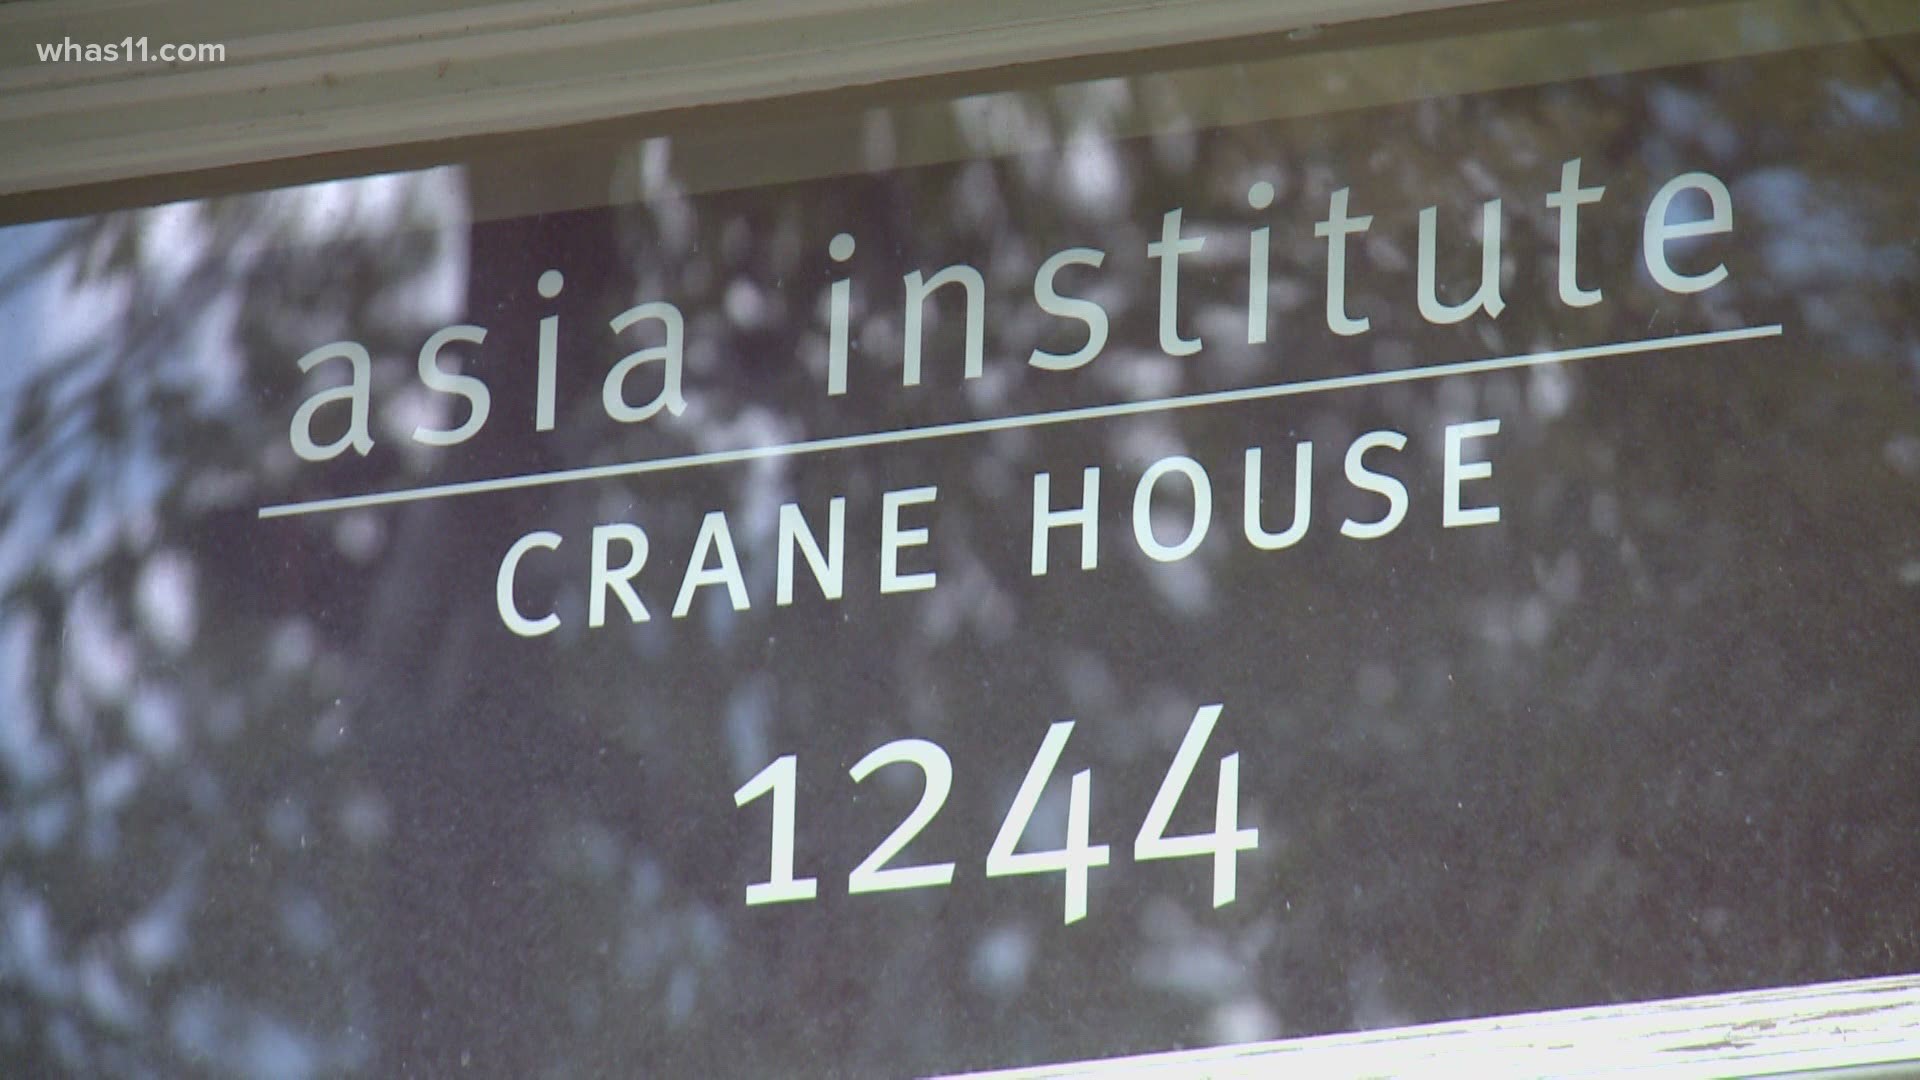 Asia Institute at the Crane House started in 1987 and serves as a place for people to learn of Asian American heritage including awareness.